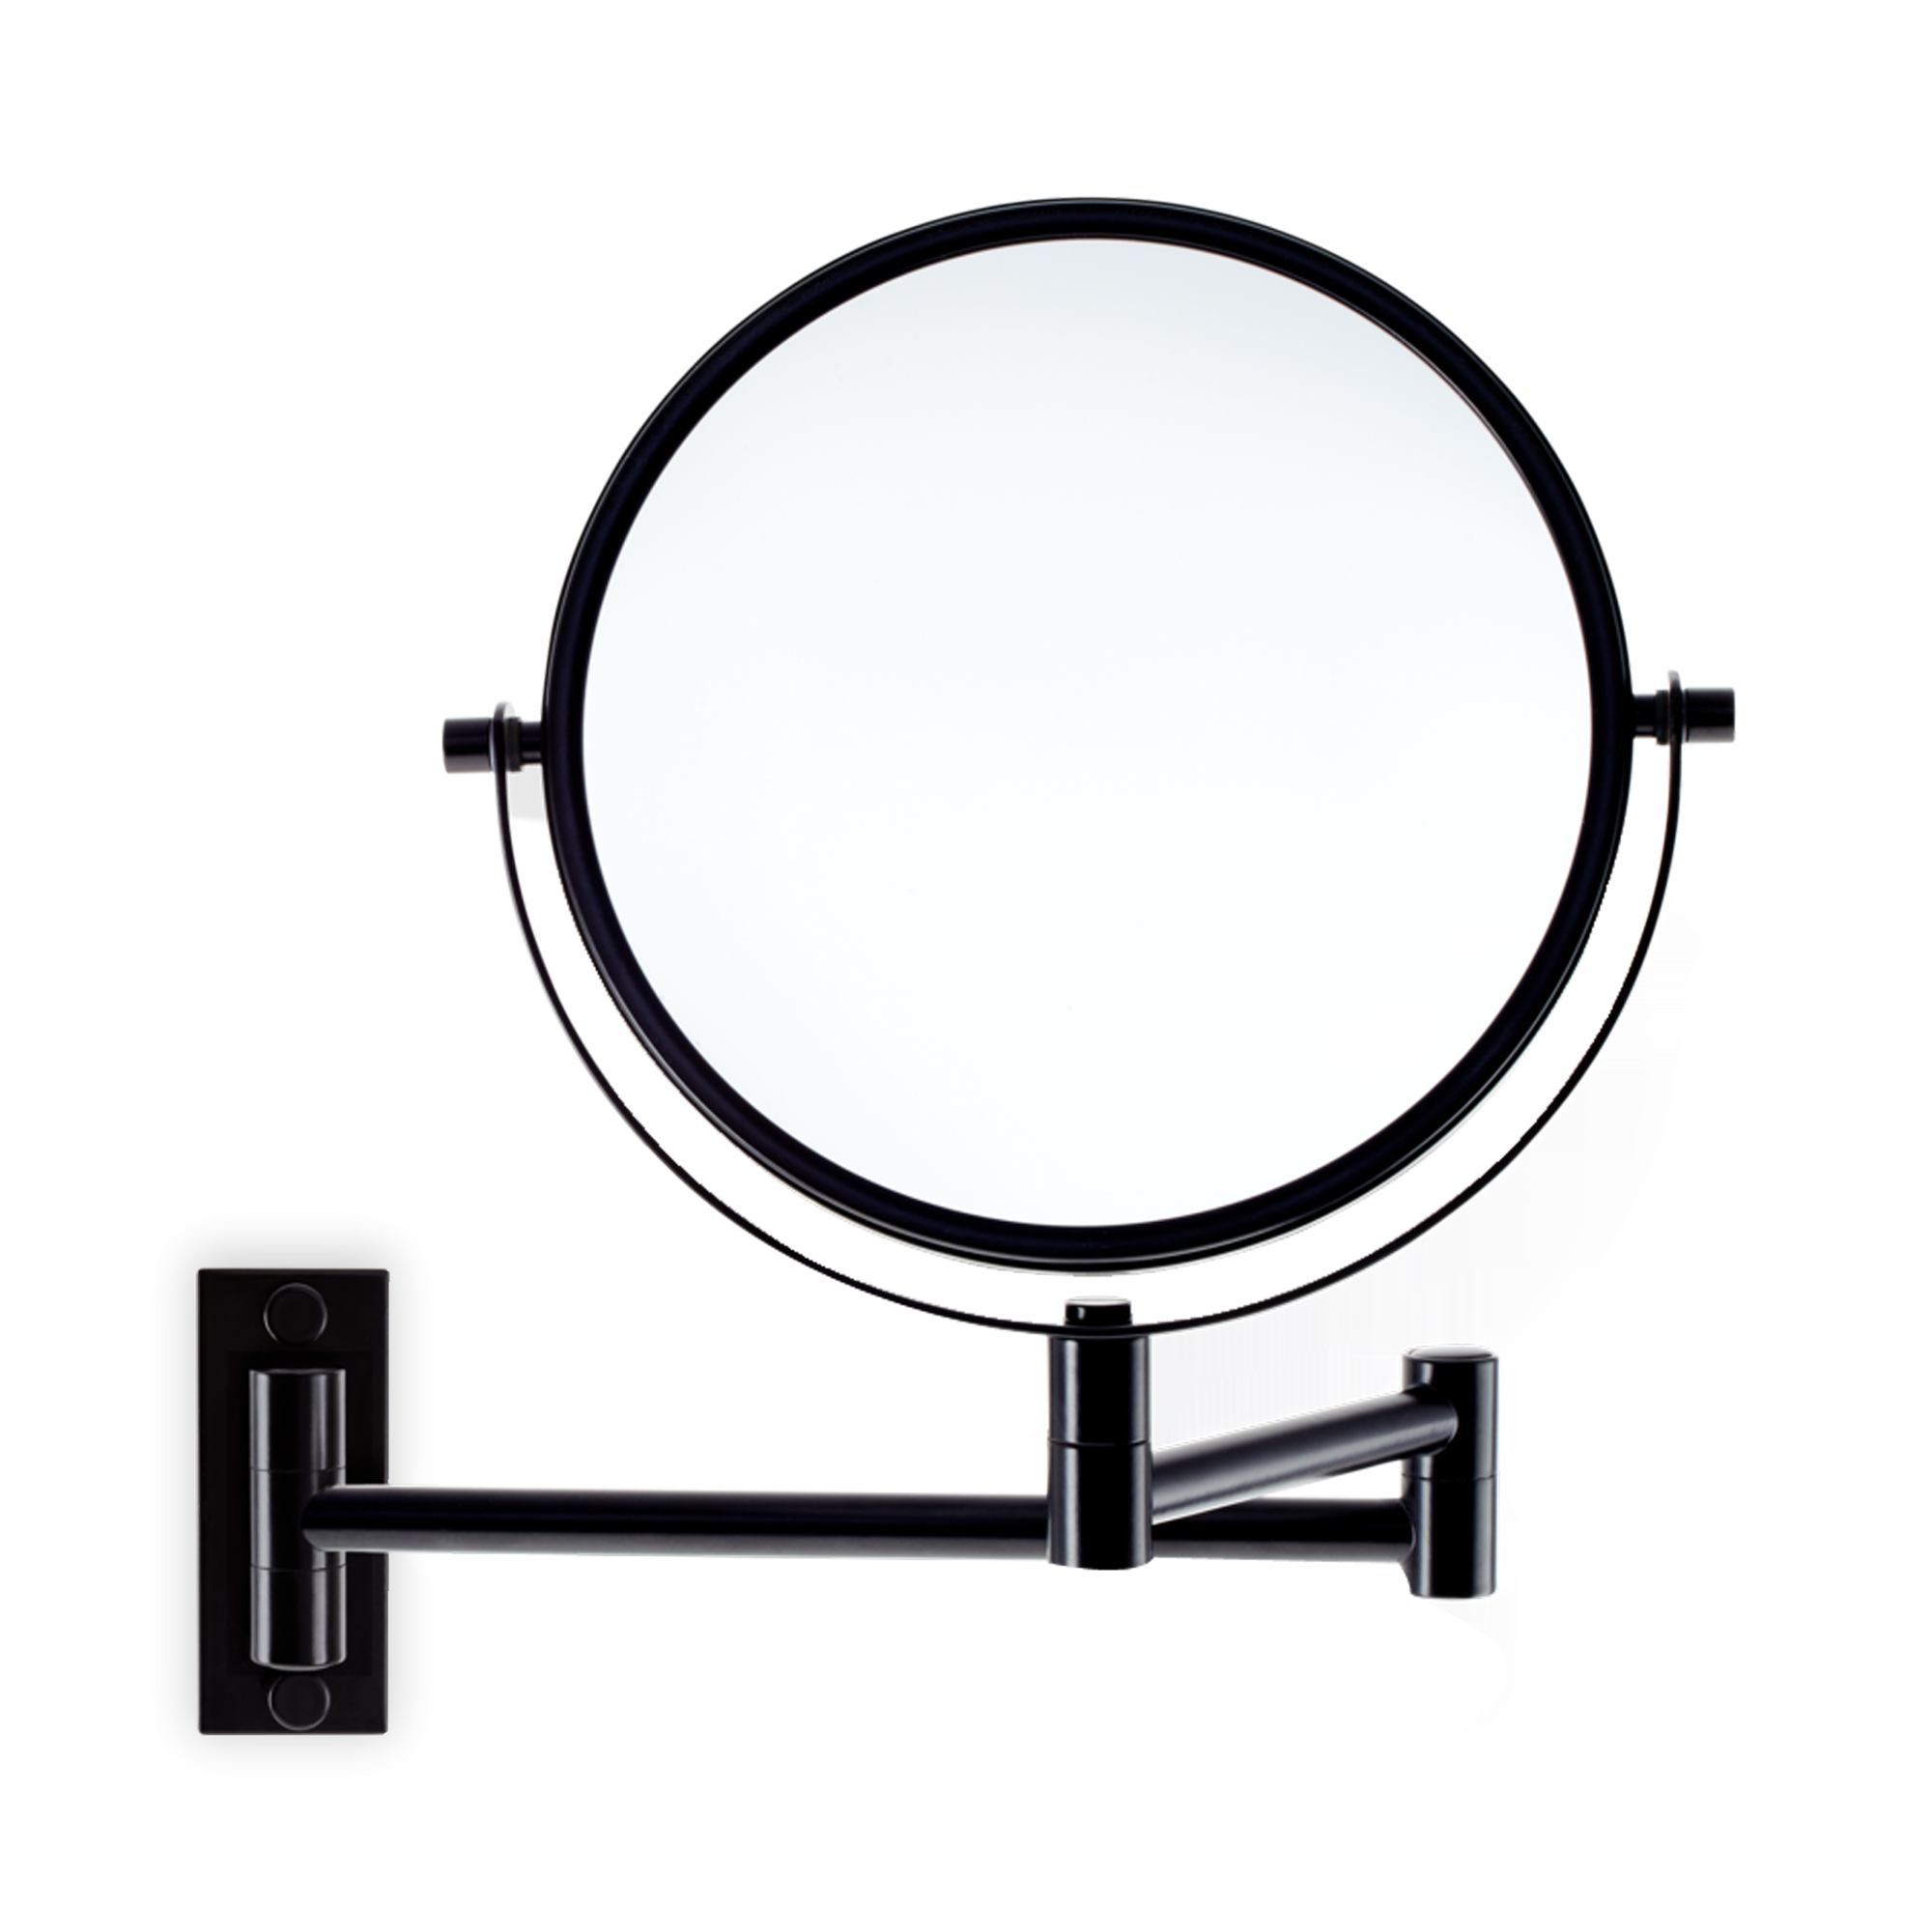 Ensure you are perfectly groomed with the Spt 33 Cosmetic Mirror with an adjustable arm, finished in a matte black tone.